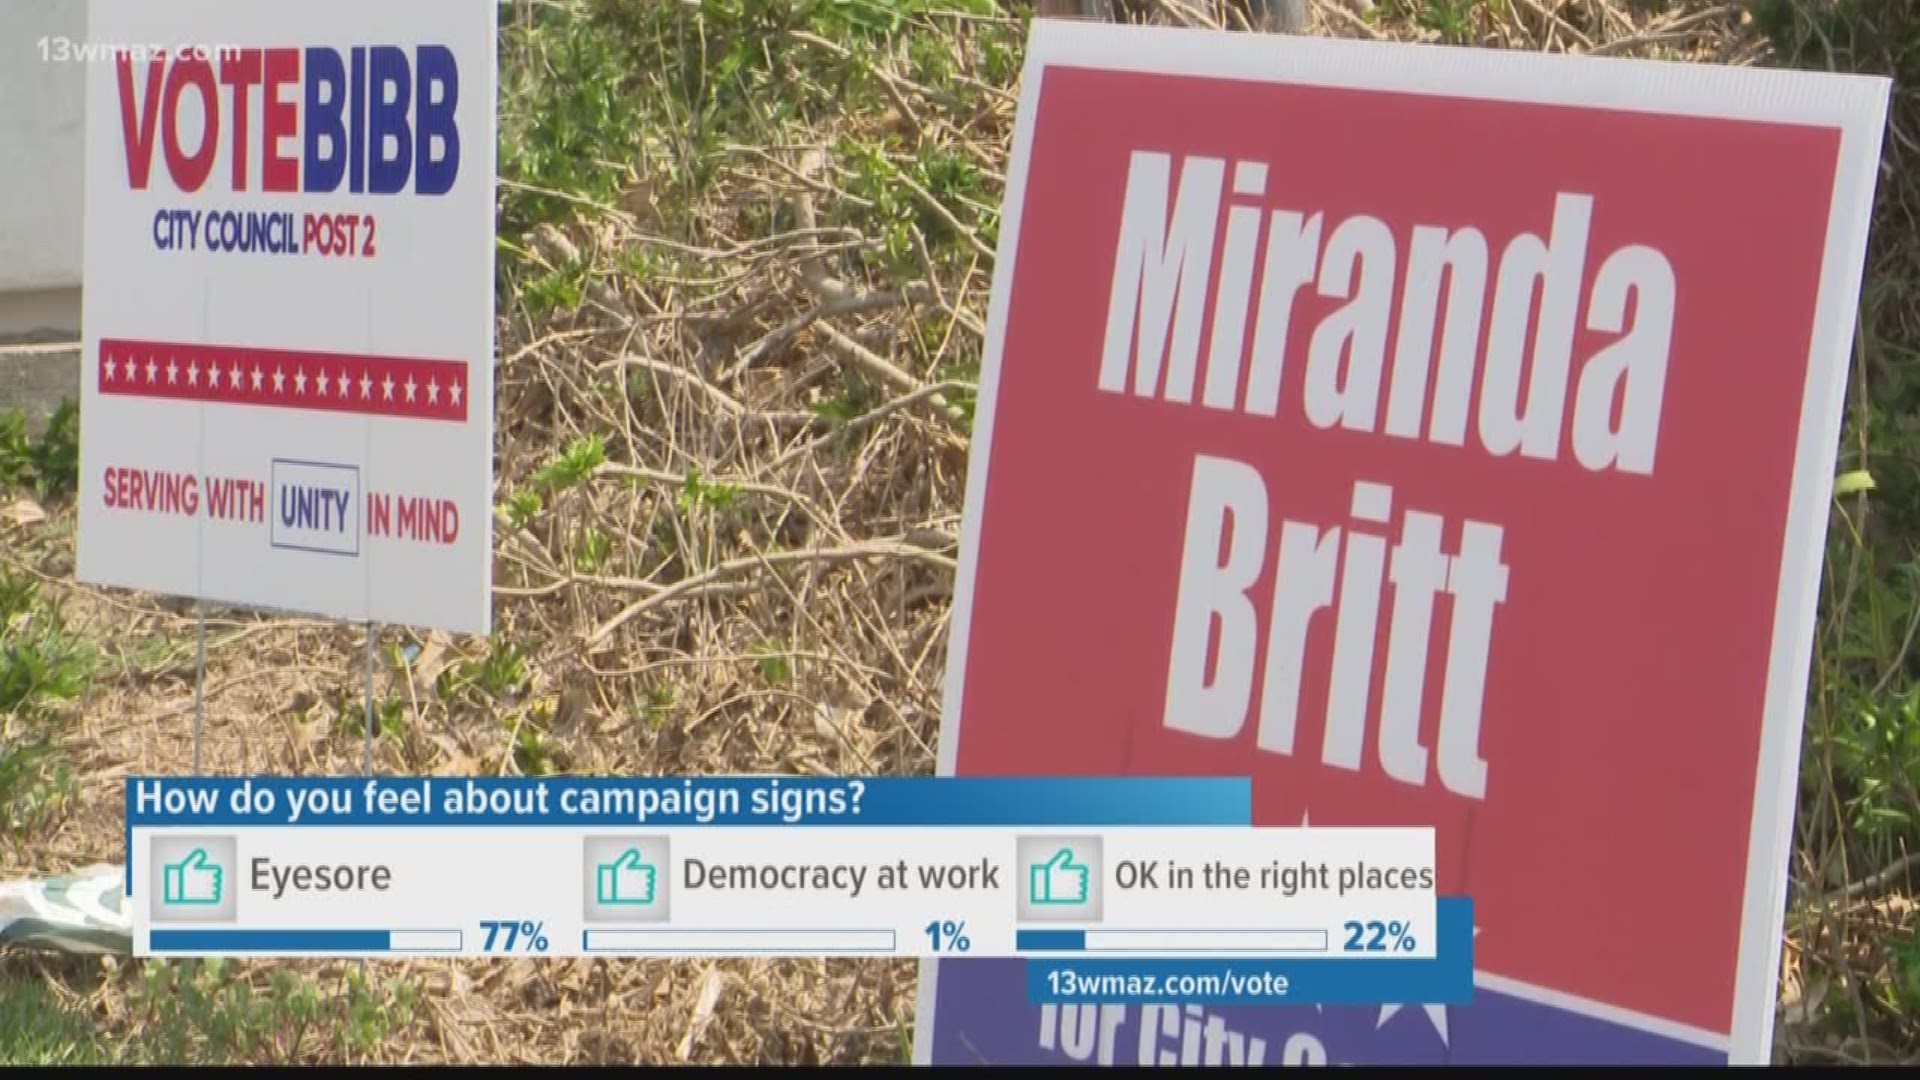 Candidates have begun to campaign in earnest -- Warner Robins council elections are just a few months away and people are supporting candidates with campaign signs. Where is it legal for candidates to put up signs?